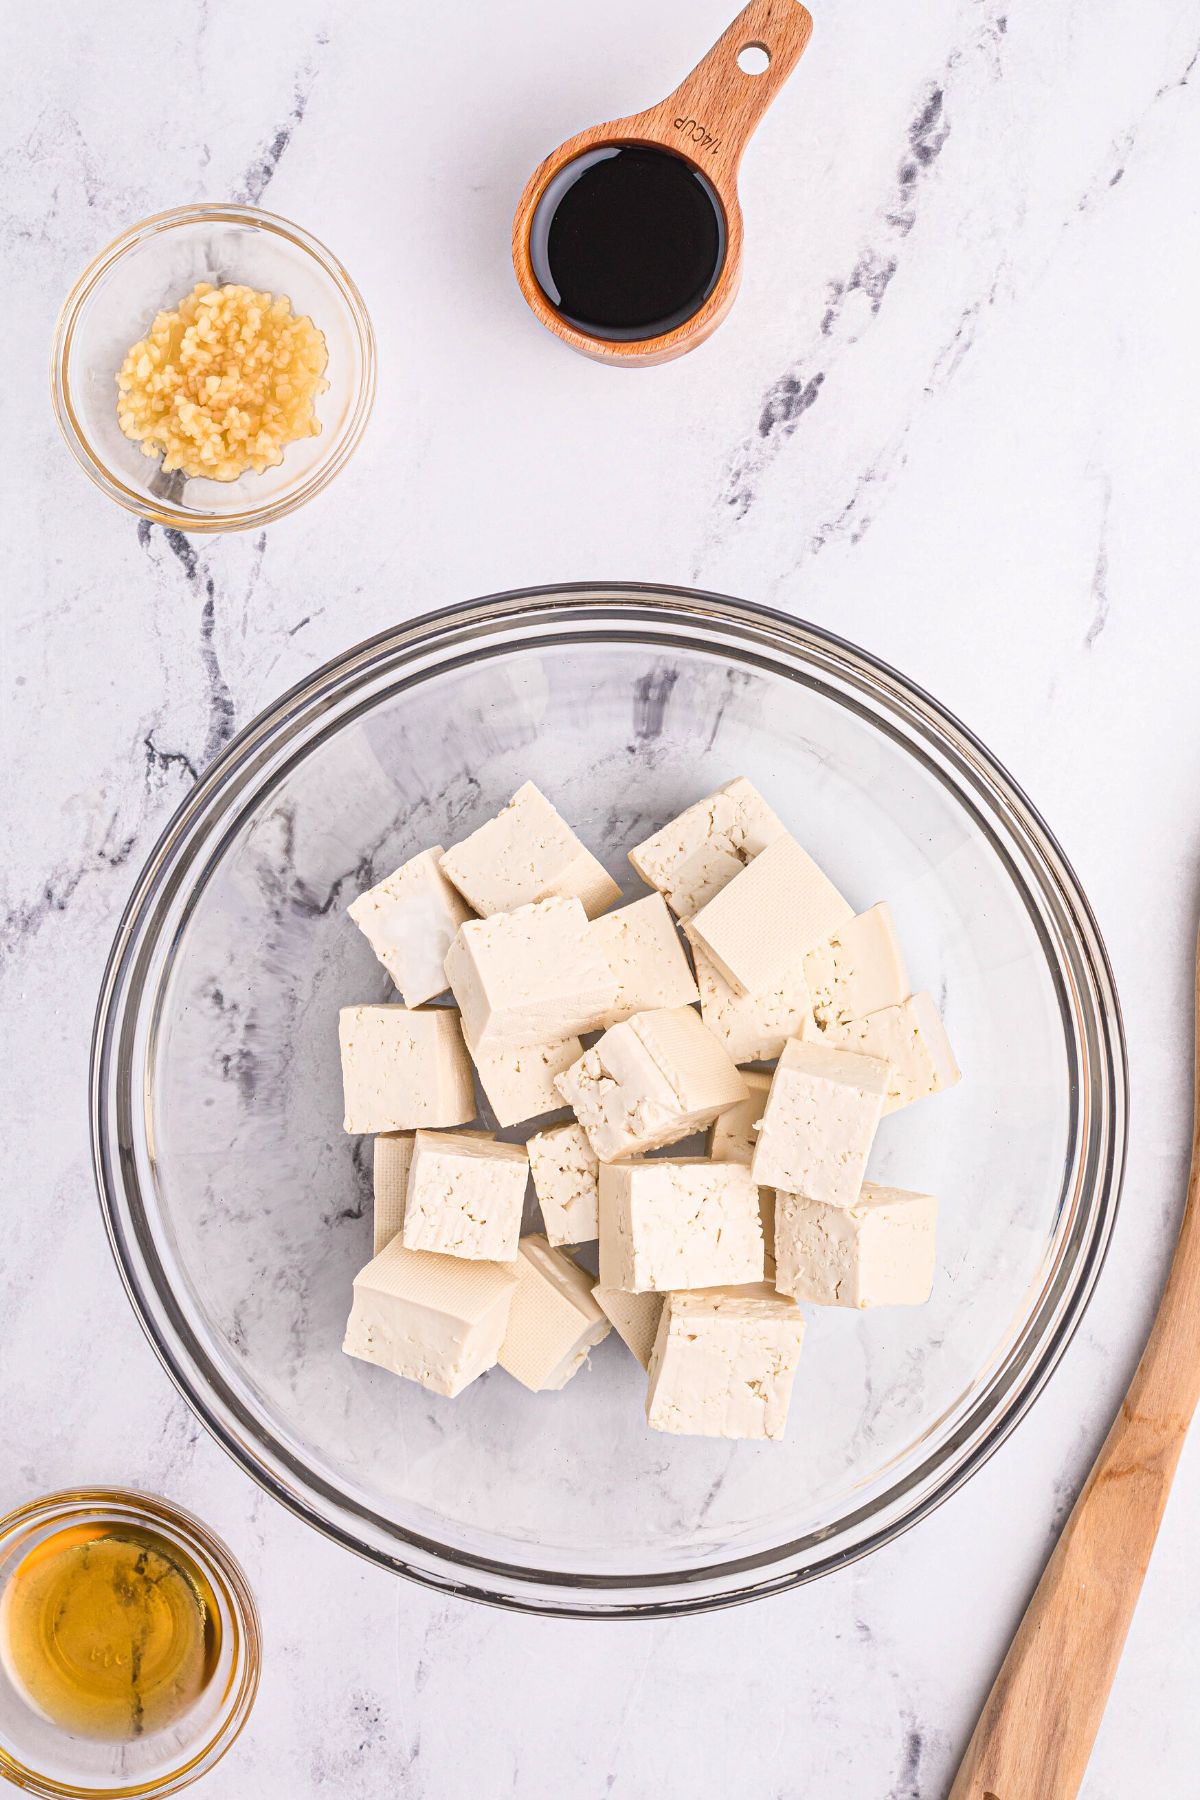 Tofu cut into cubes in a clear glass bowl